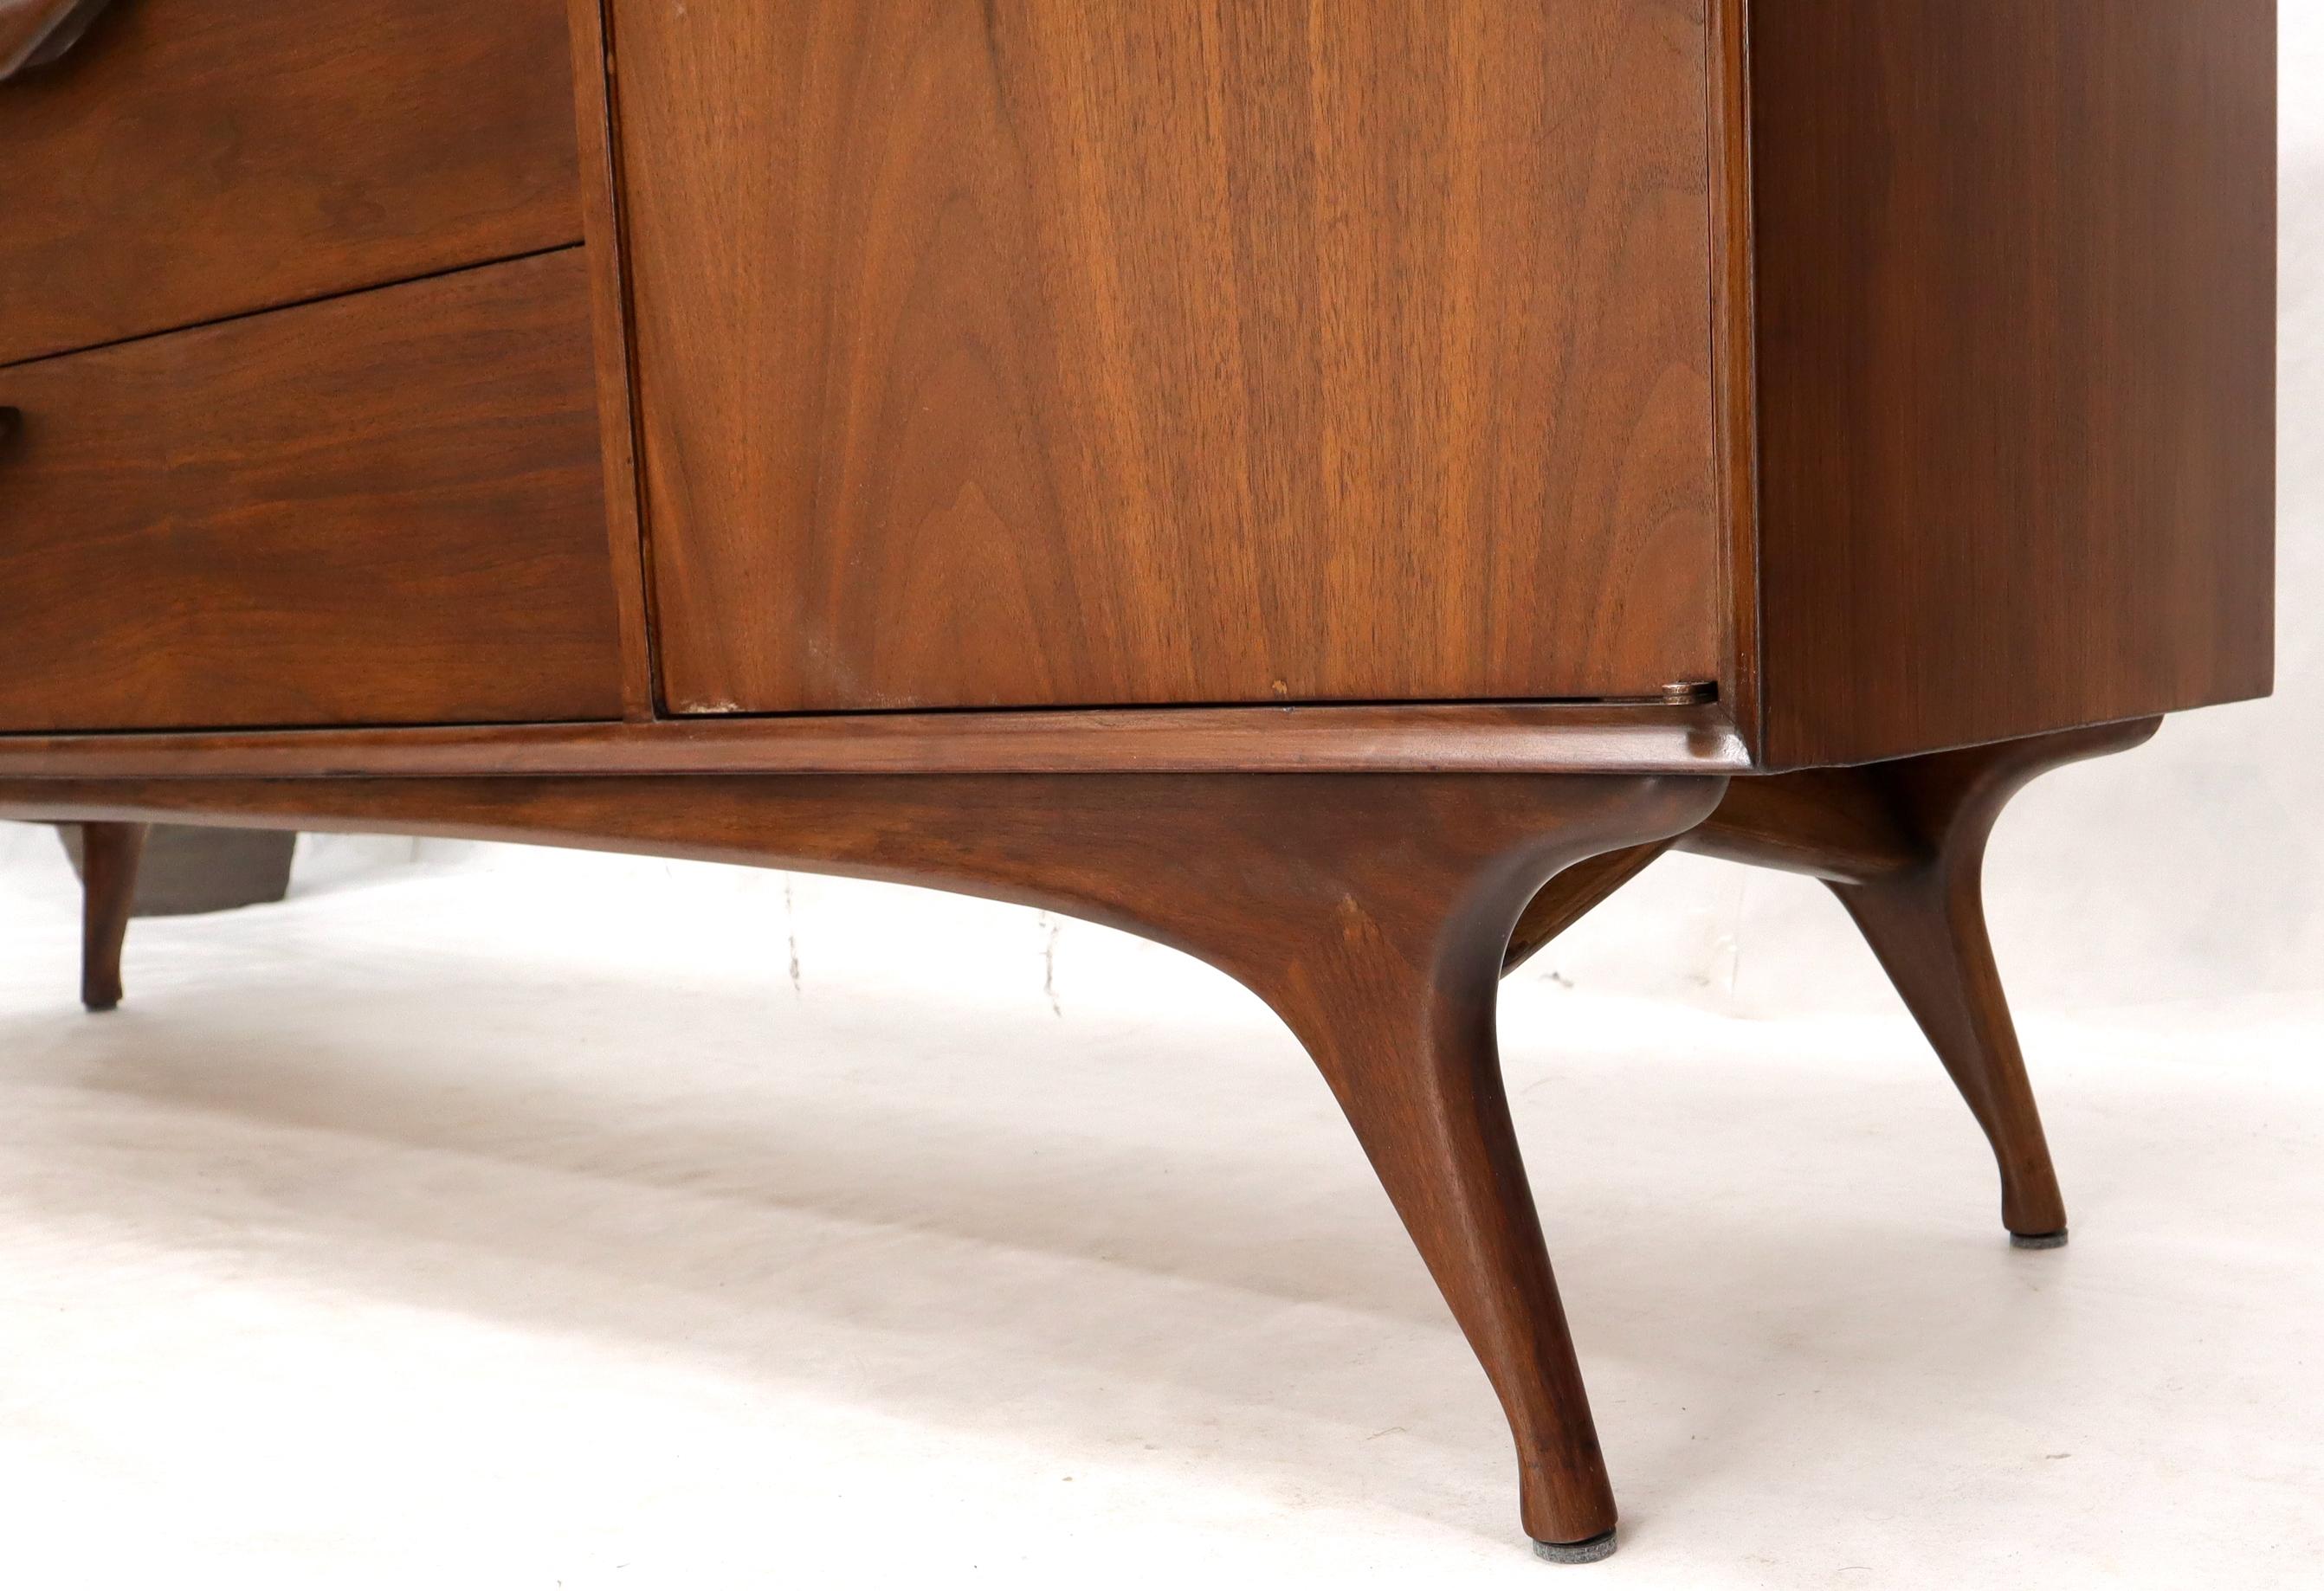 Sculptural Legs Long 9 Drawers Walnut Credenza Dresser with Doors For Sale 3